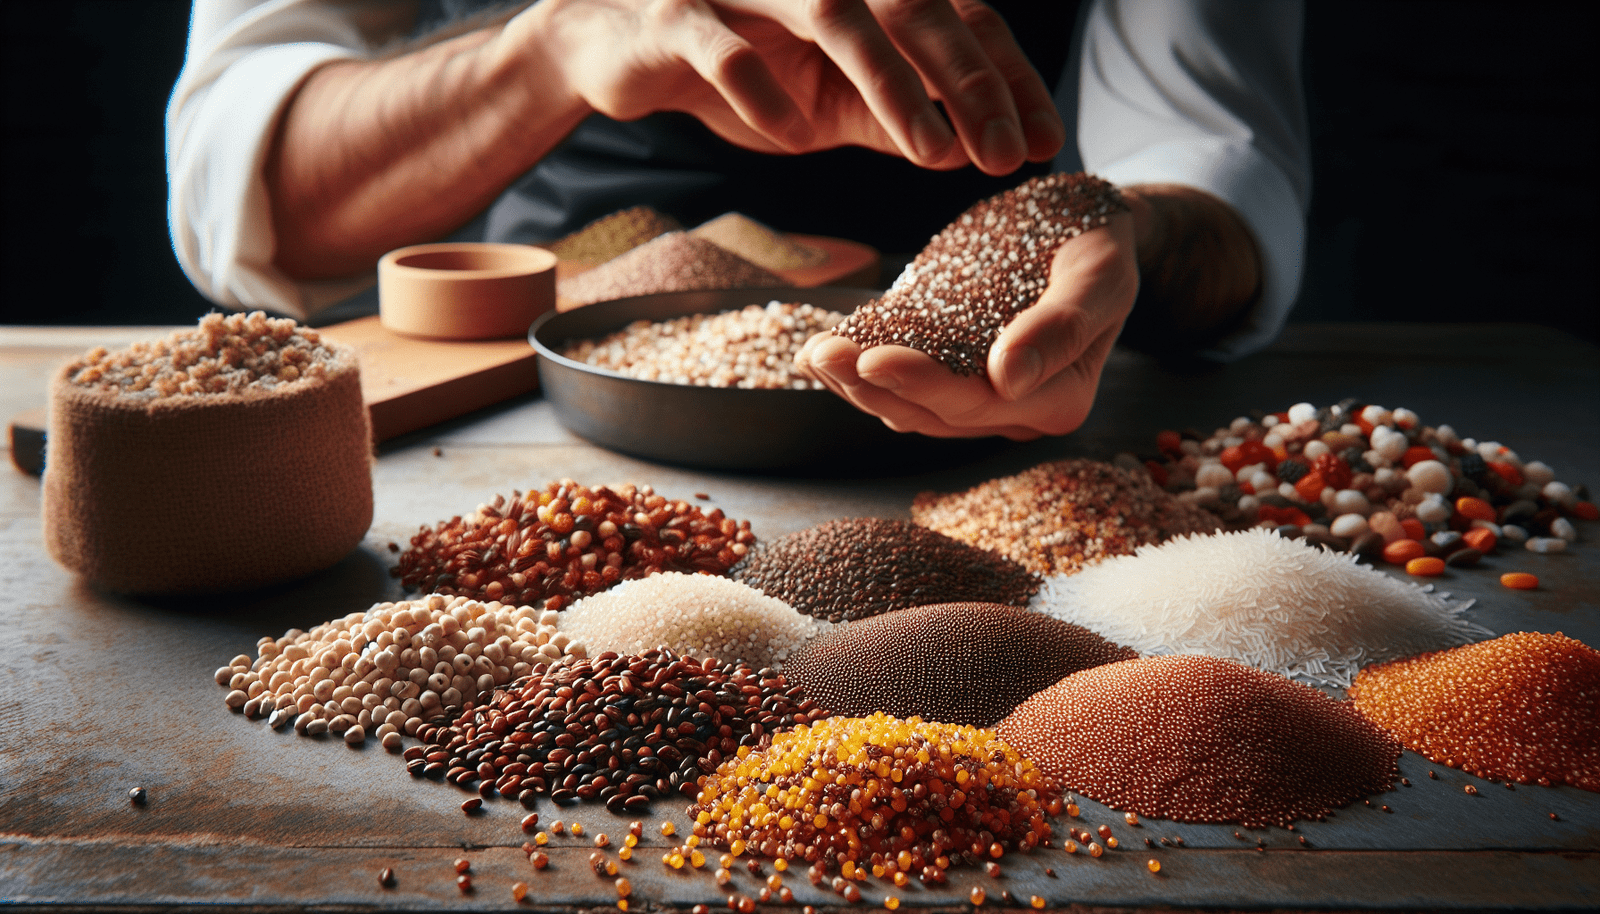 How Are Chefs Exploring The Use Of Unconventional Grains In Korean Cooking?